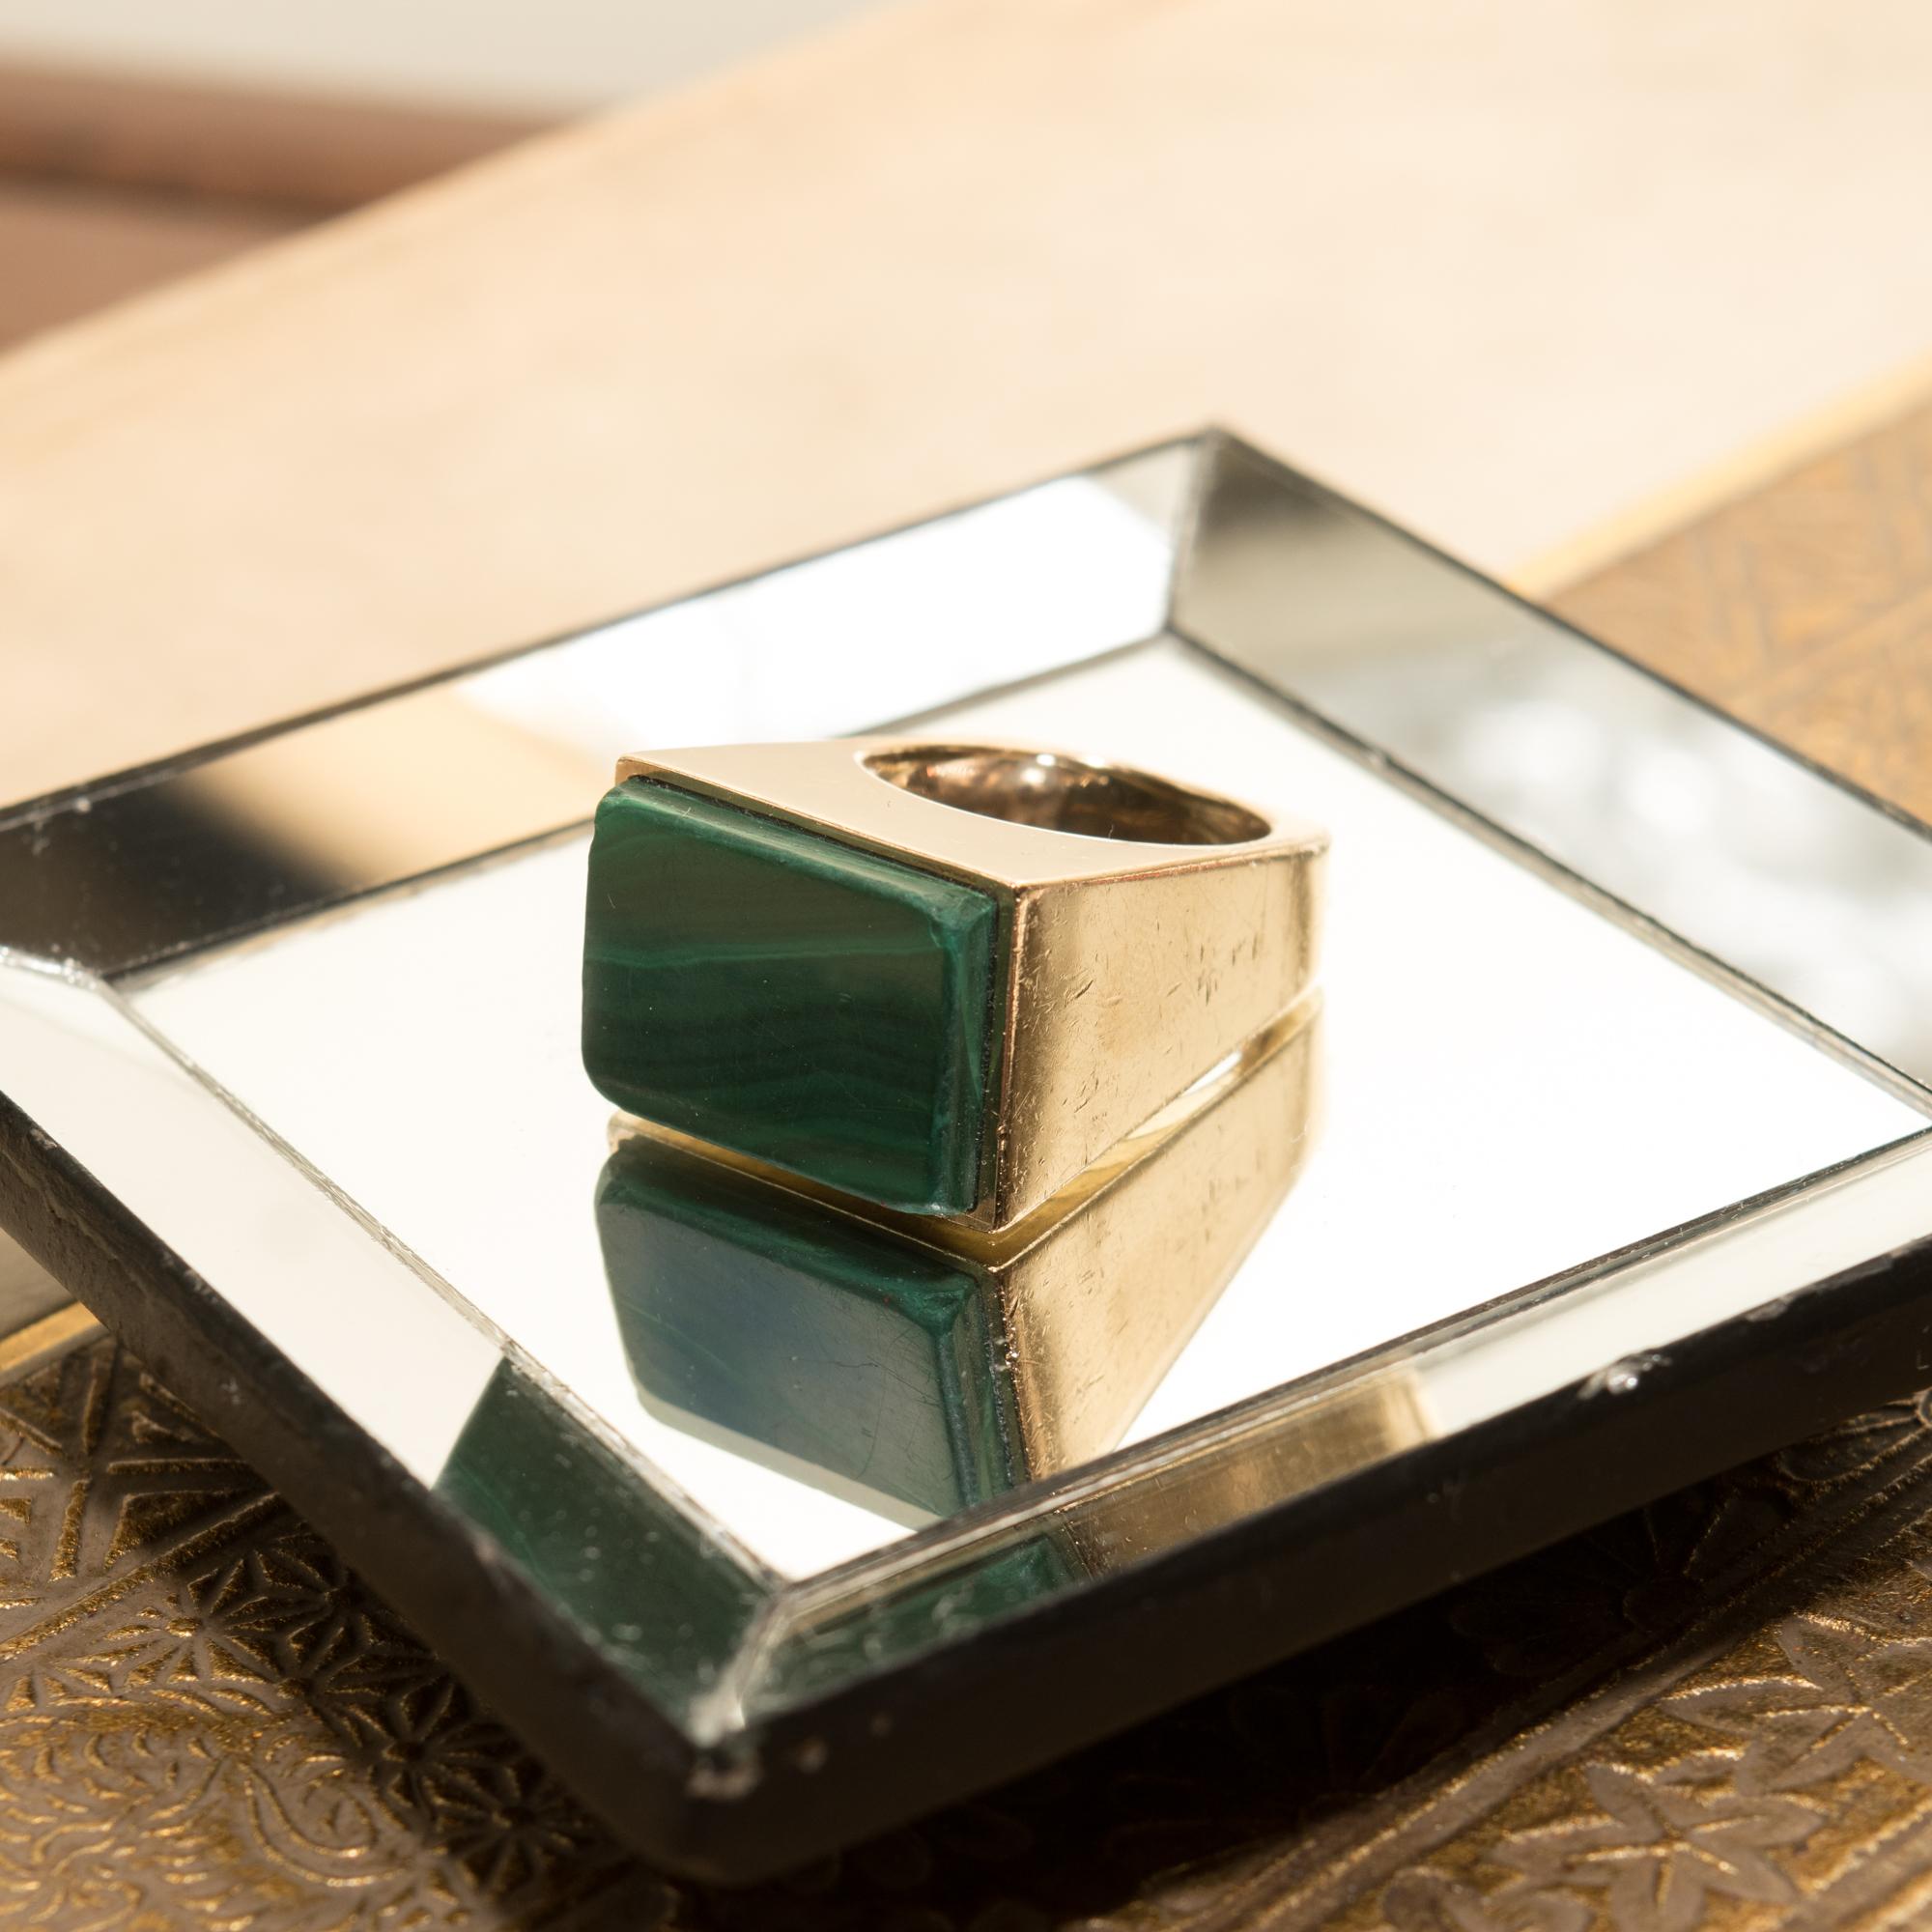 An incredible modernist 14K malachite inlay signet ring. Features a tall geometric design with sleek edges and polished angular sides. The focal point of this piece boasts a flat rectangular slab of malachite, slightly raised in a horizontal bezel